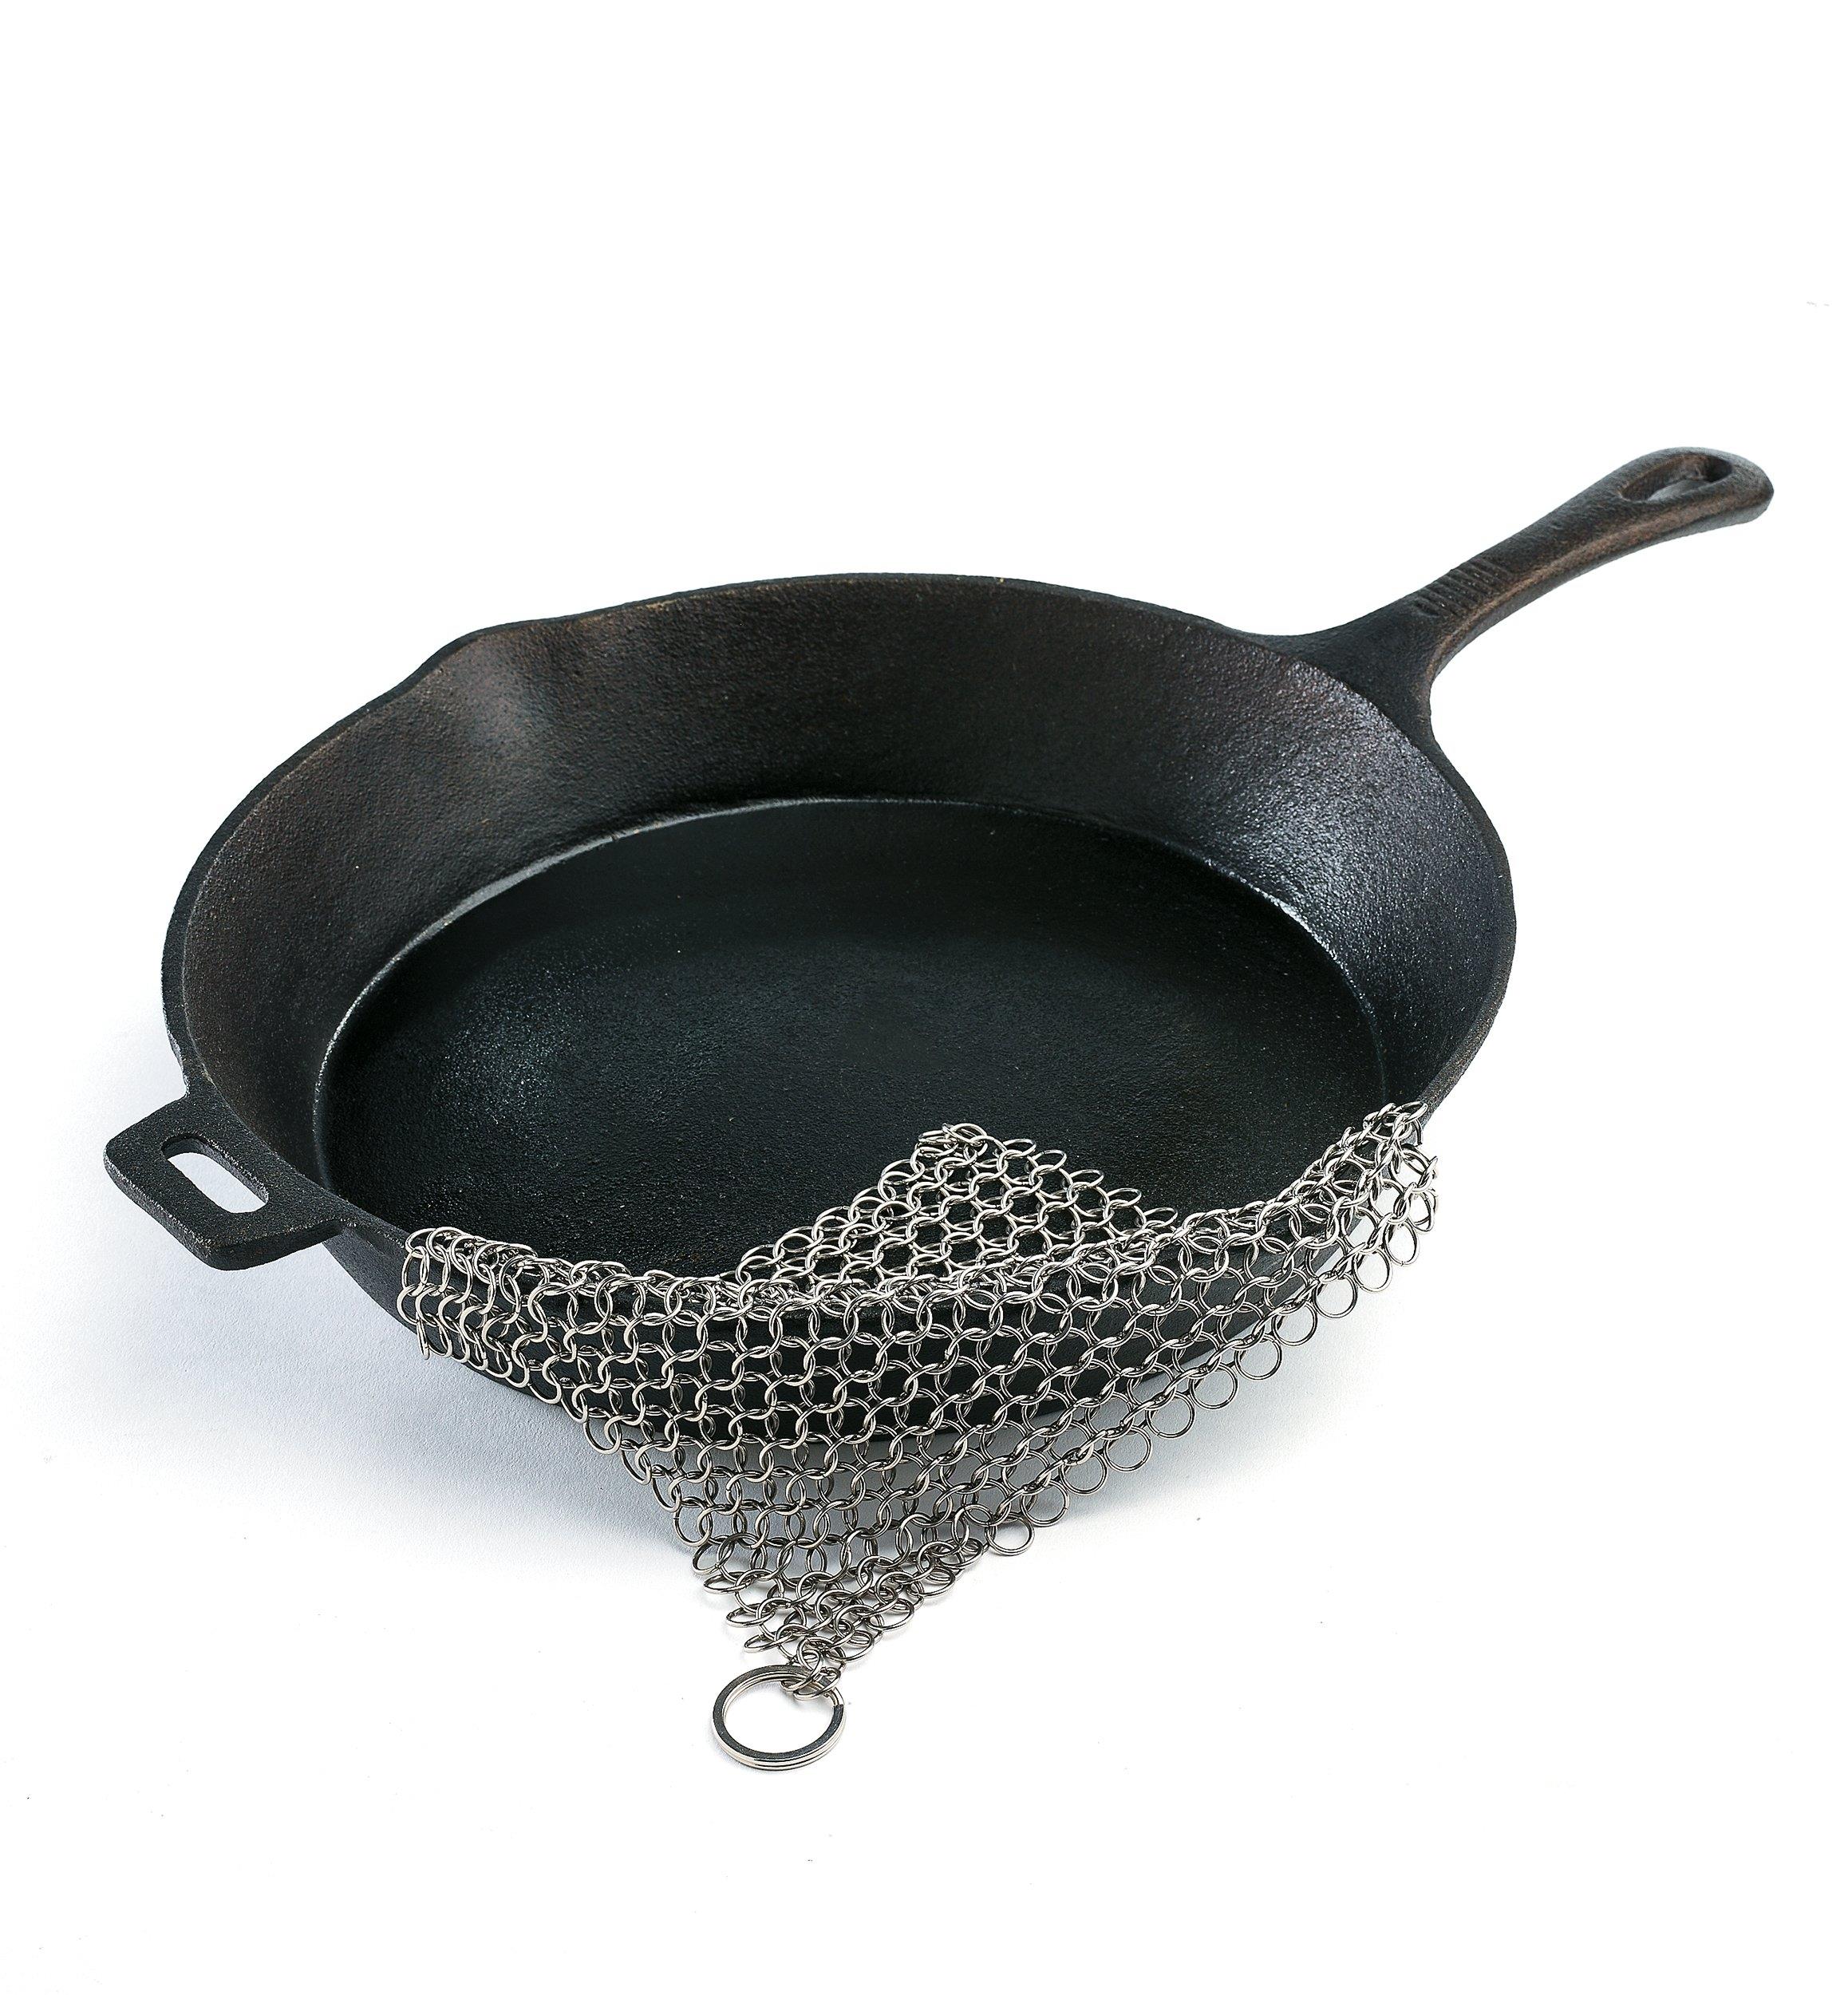 https://assets.leevalley.com/Size5/10064/DB309-stainless-steel-chain-mail-scrubber-a-01-r.jpg